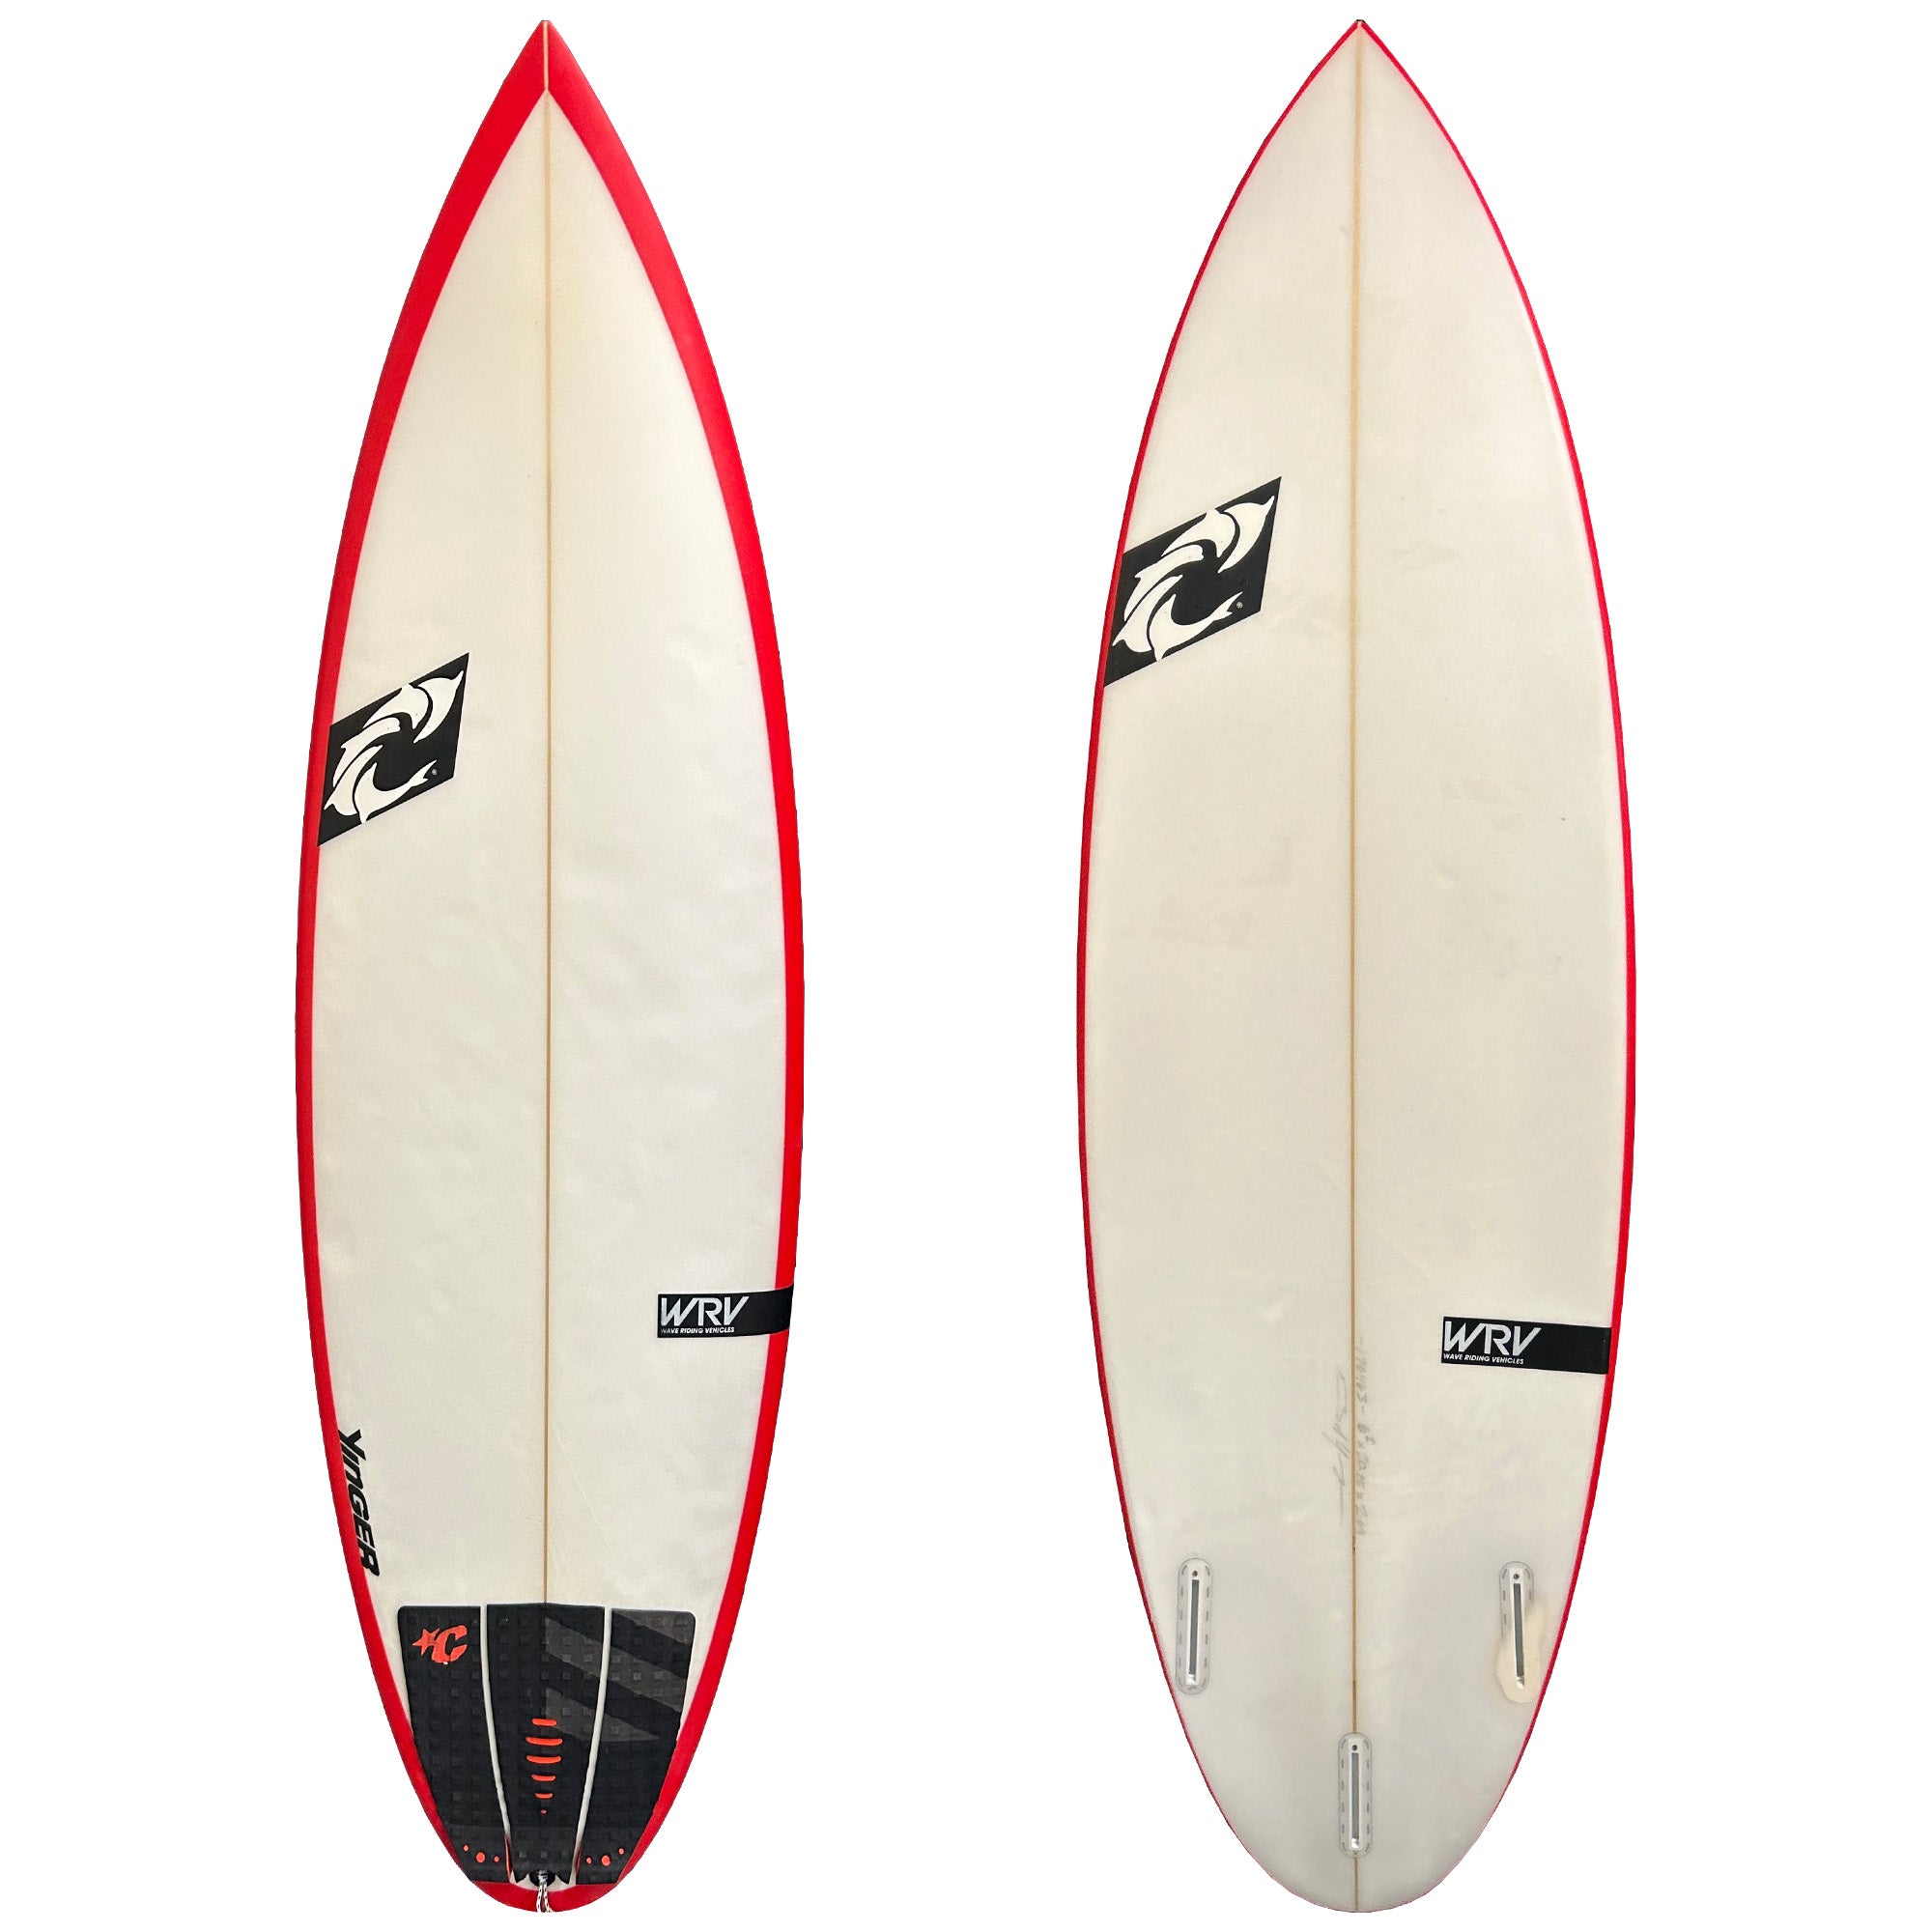 WRV 6'2 Consignment Surfboard